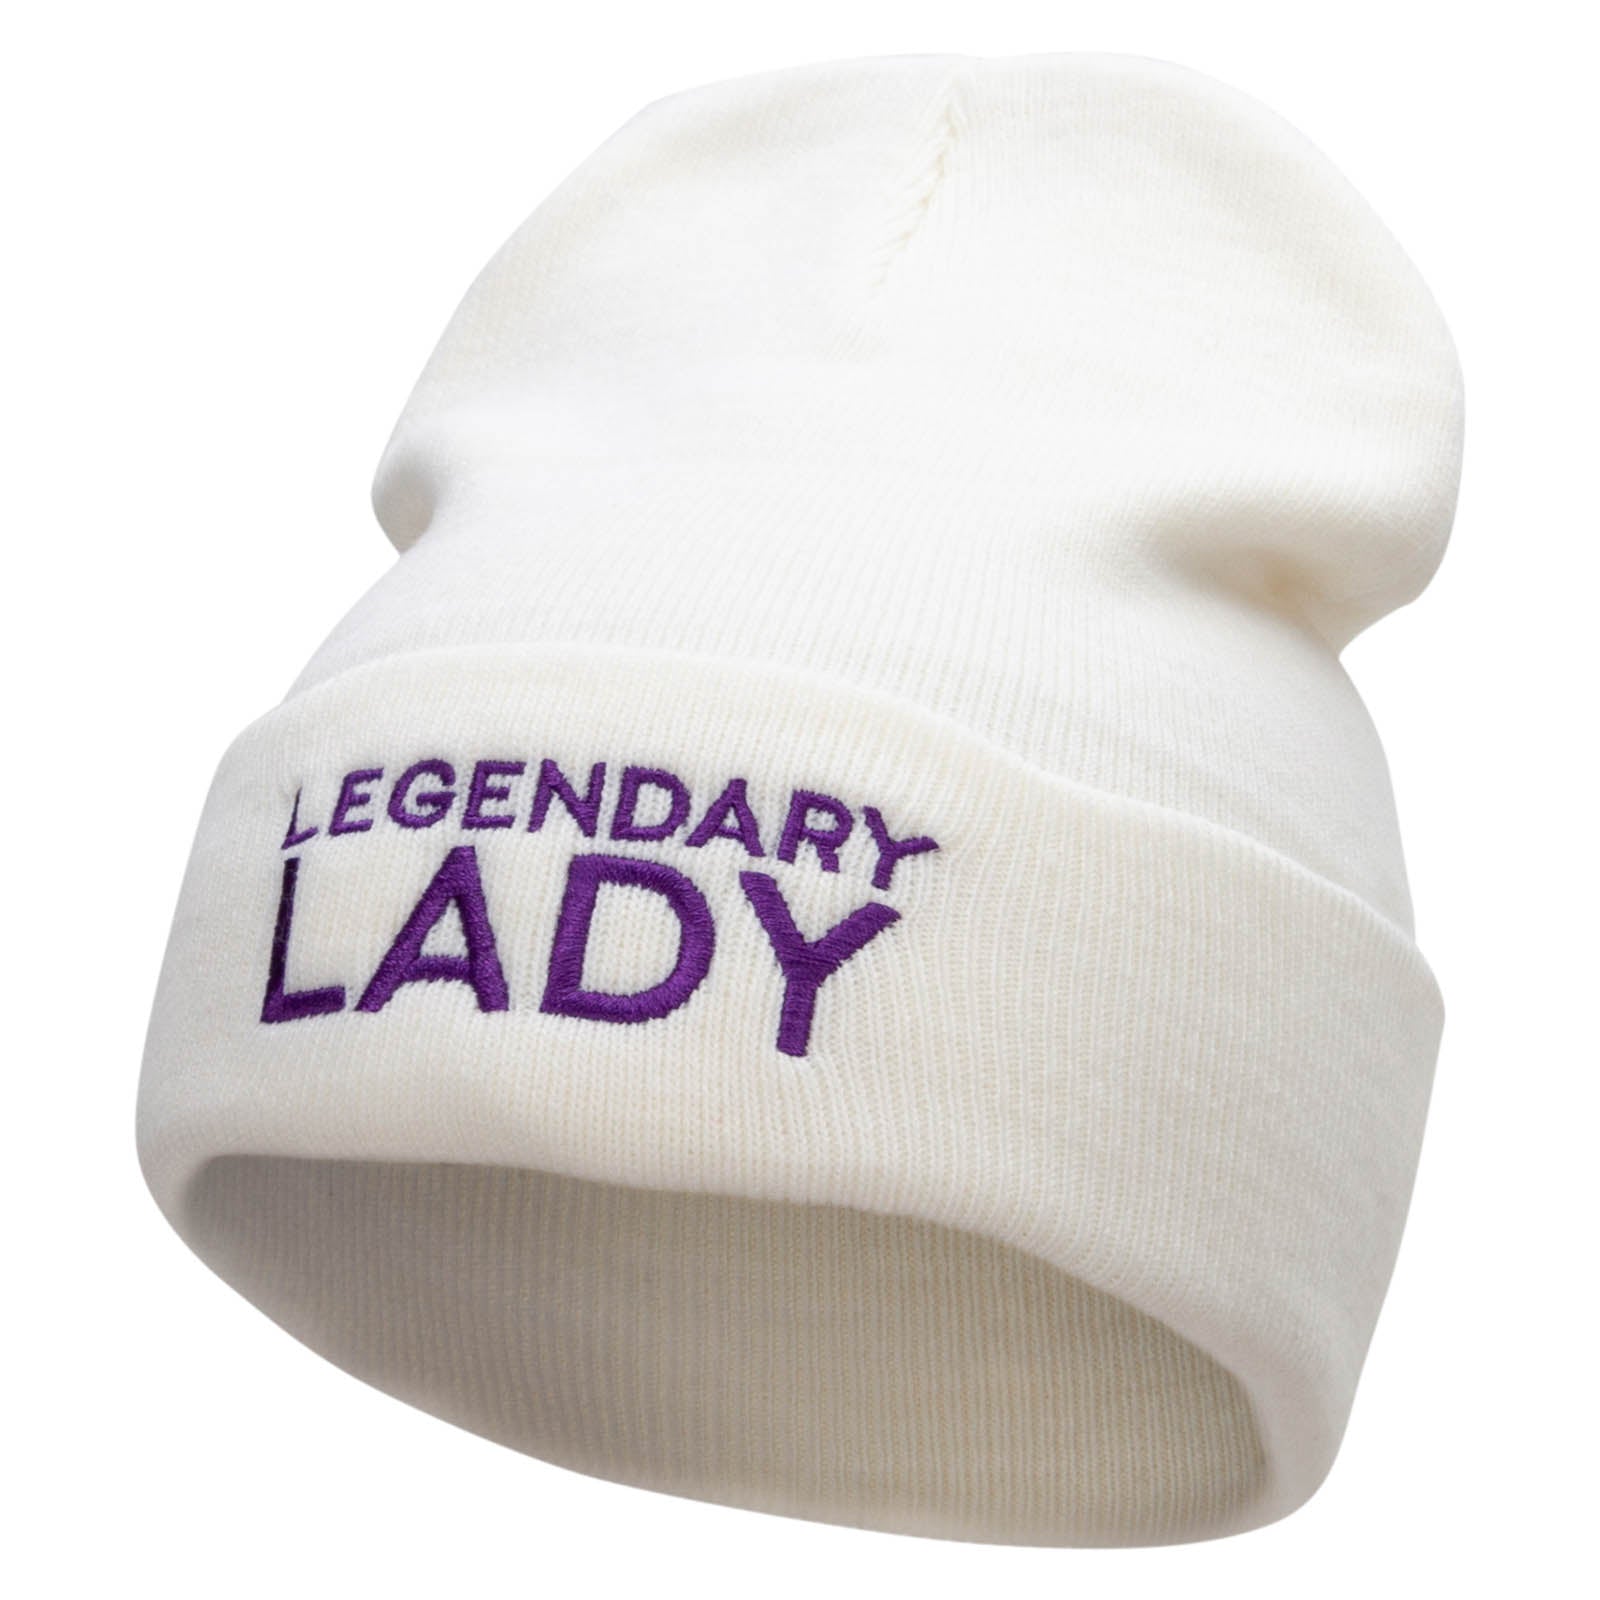 Legendary Lady Embroidered 12 Inch Long Knitted Beanie - White OSFM